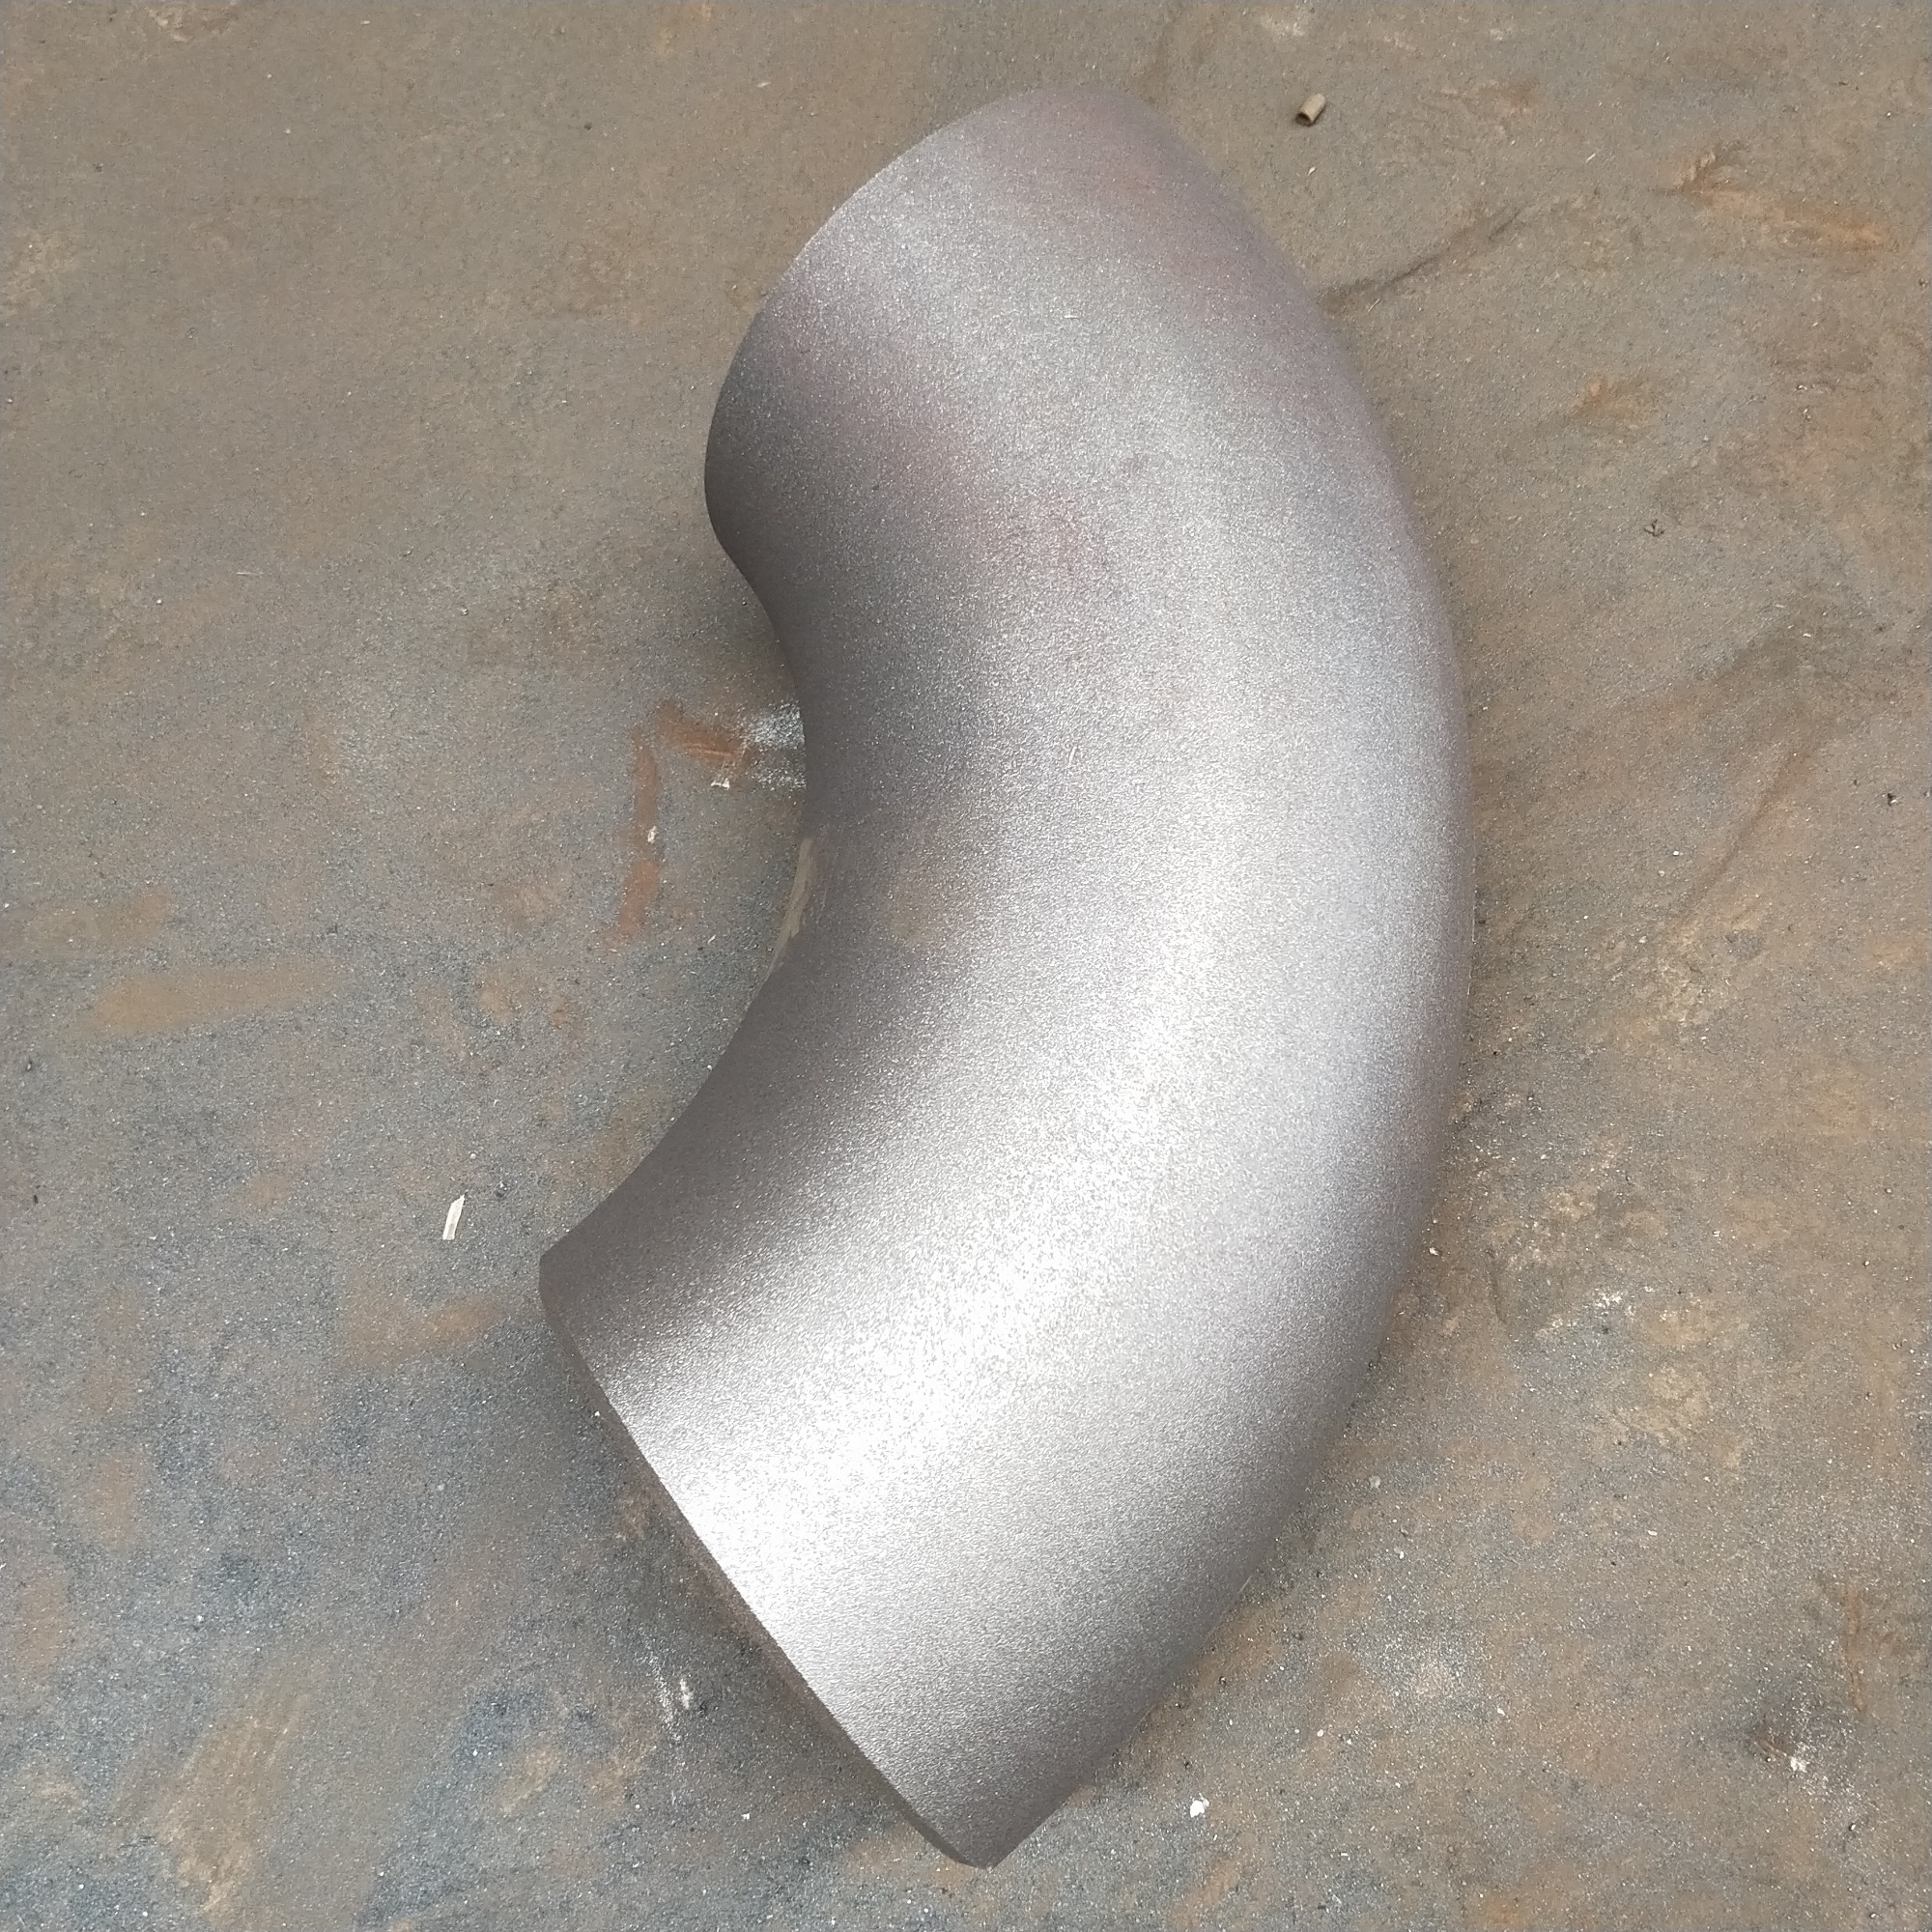 What are the advantages of stamping stainless steel elbow